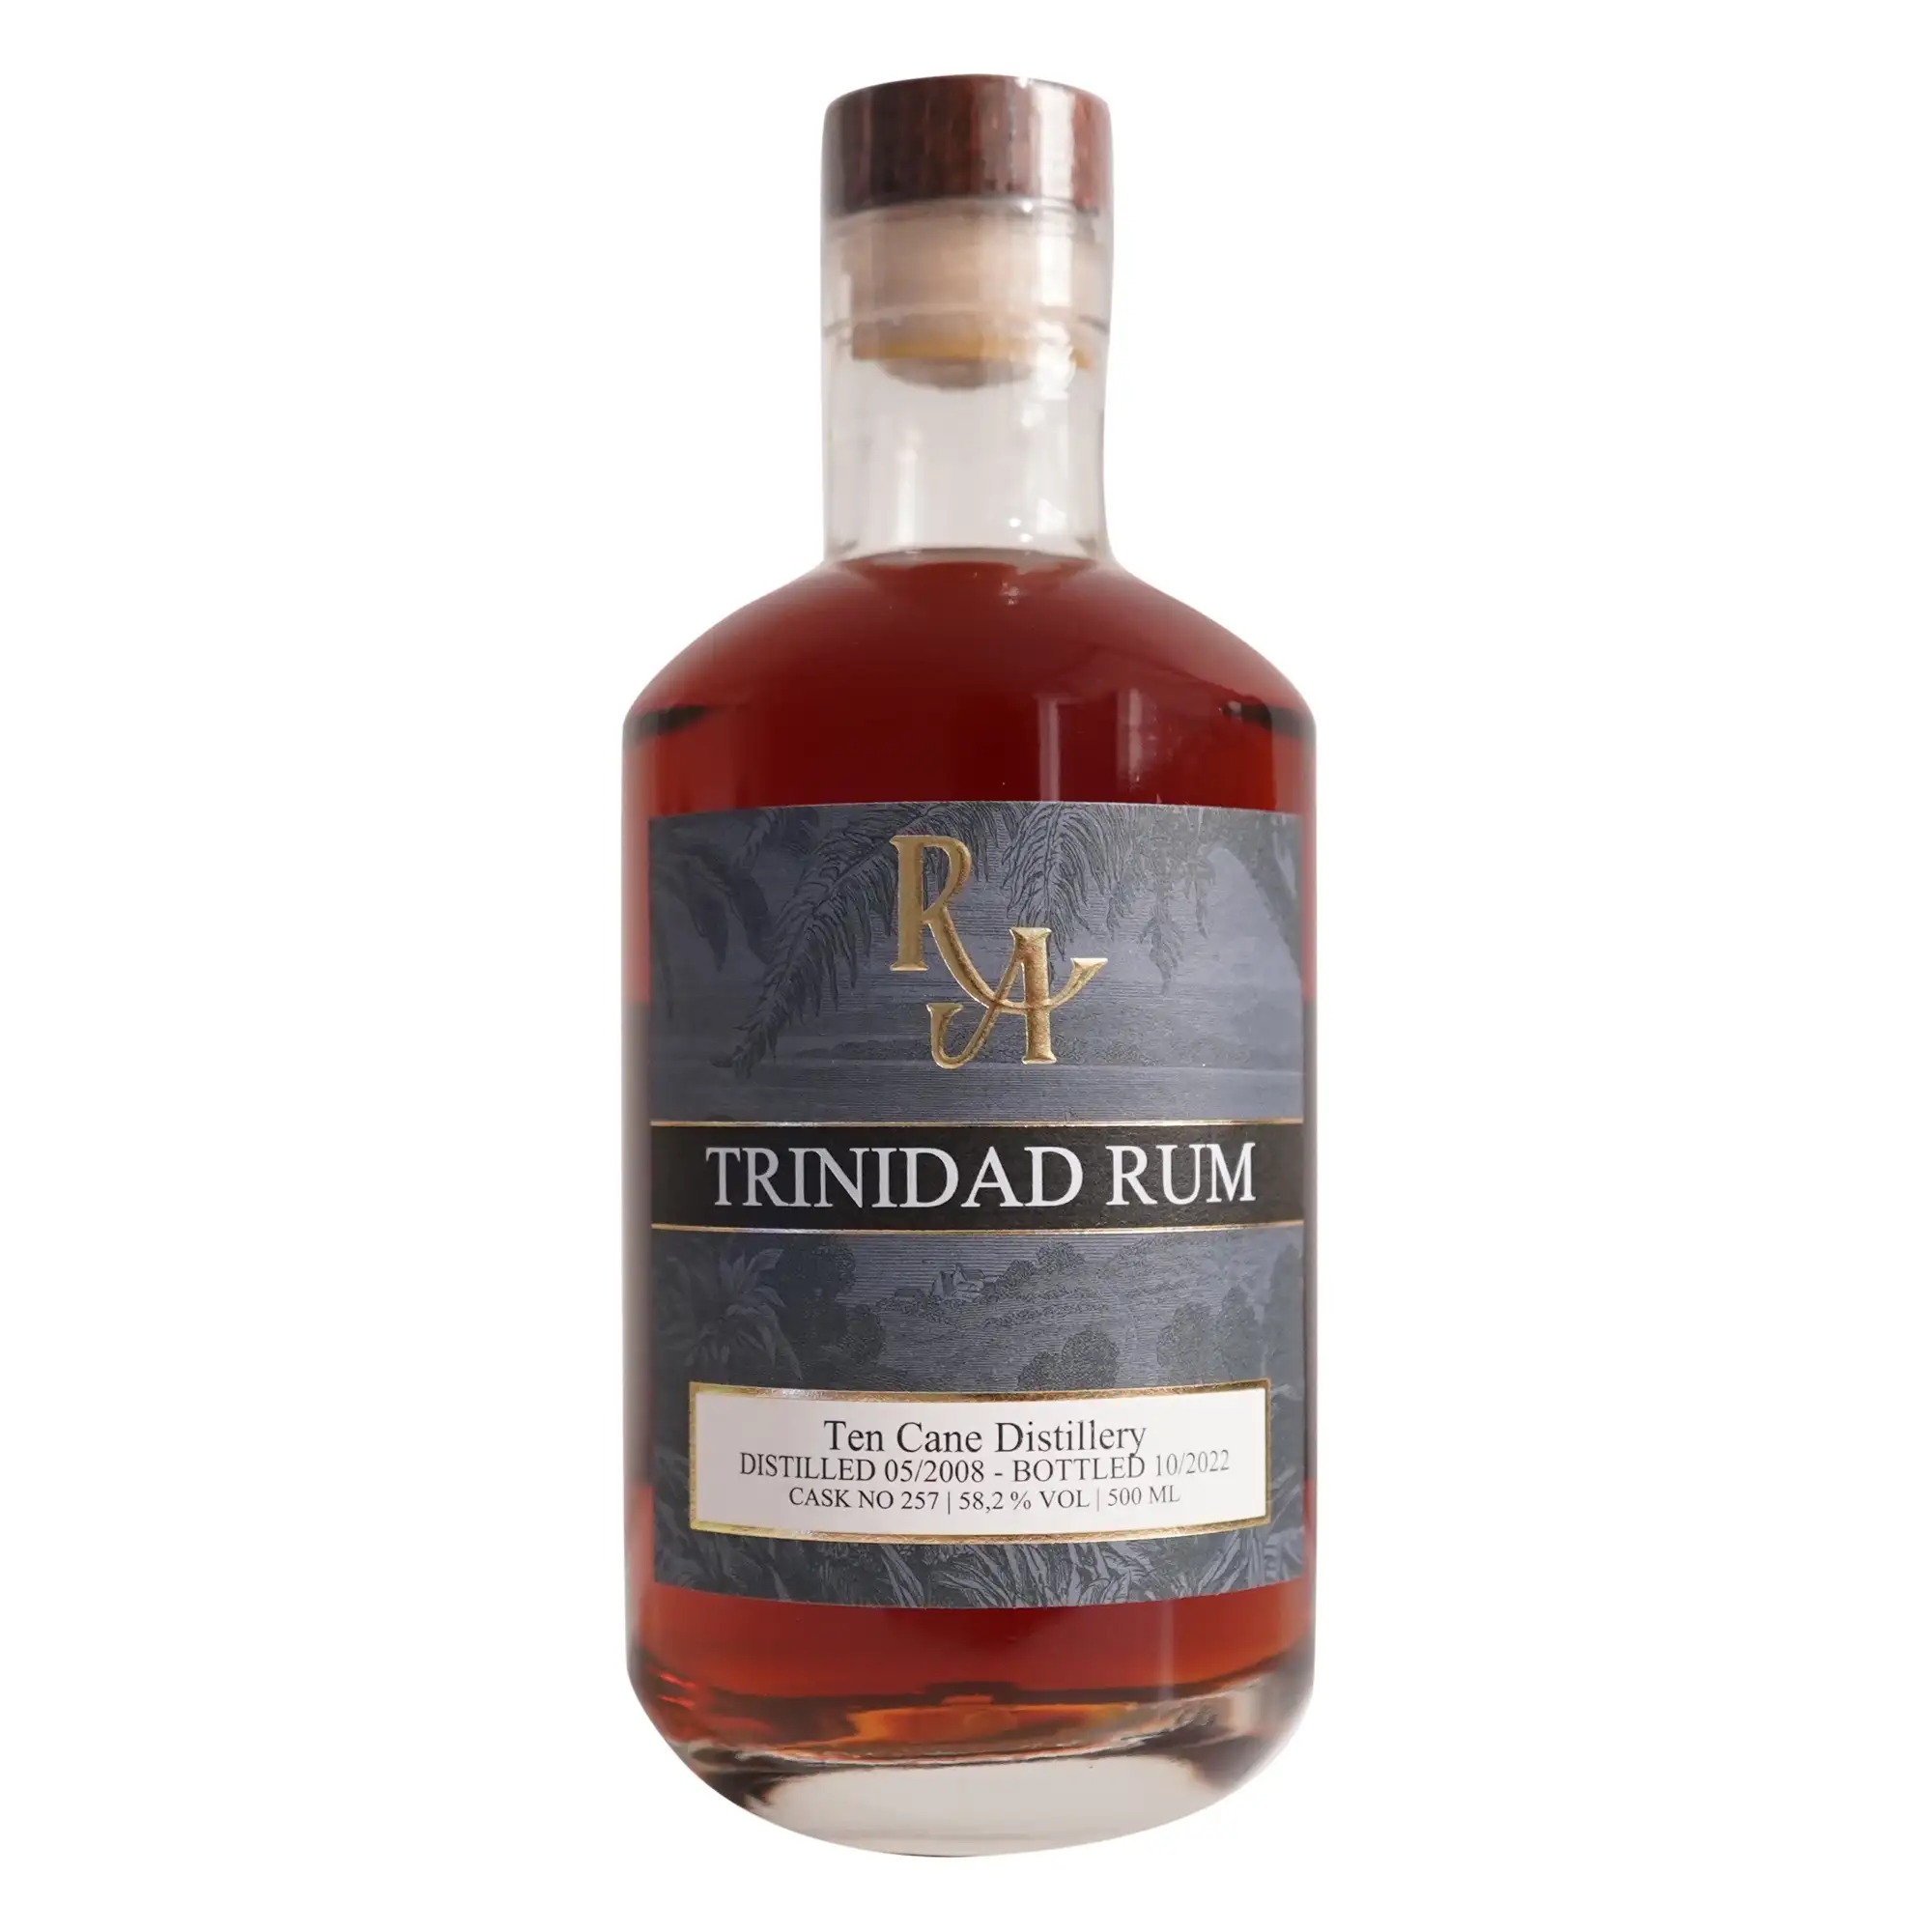 Image of the front of the bottle of the rum Rum Artesanal Trinidad Rum